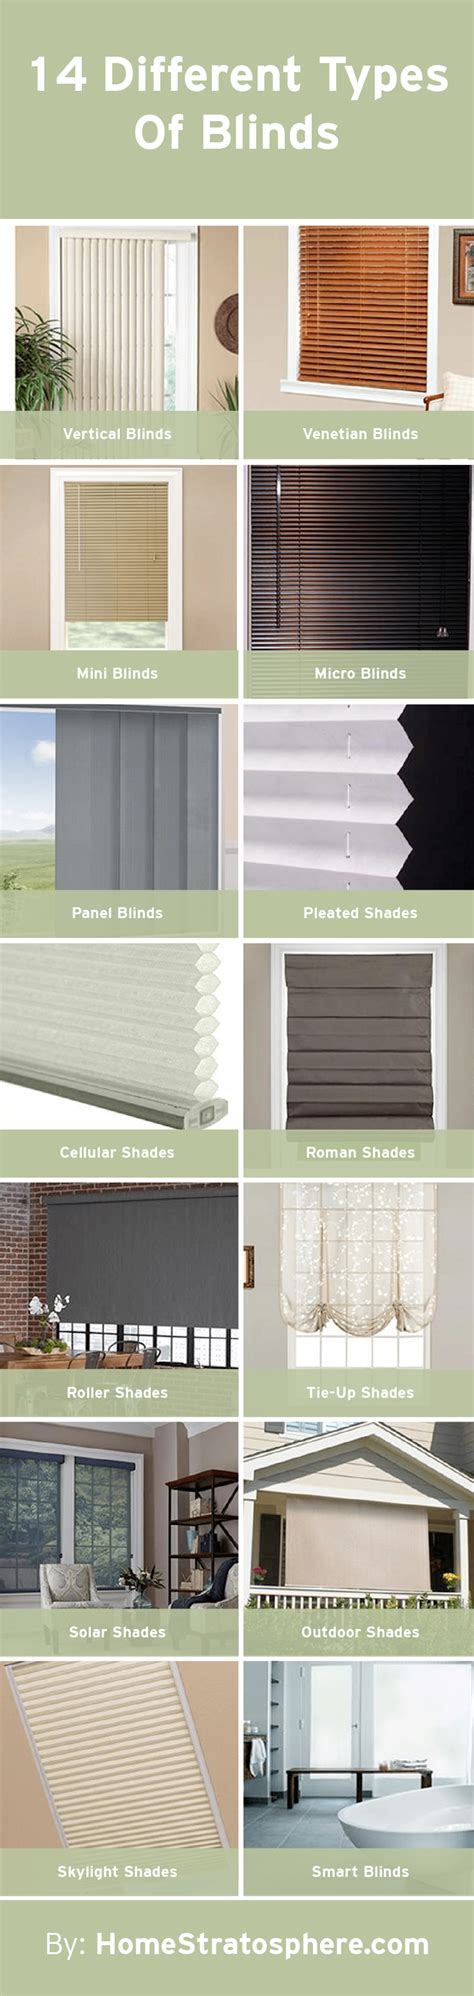 14 Different Types Of Blinds Extensive Buying Guide Types Of Blinds